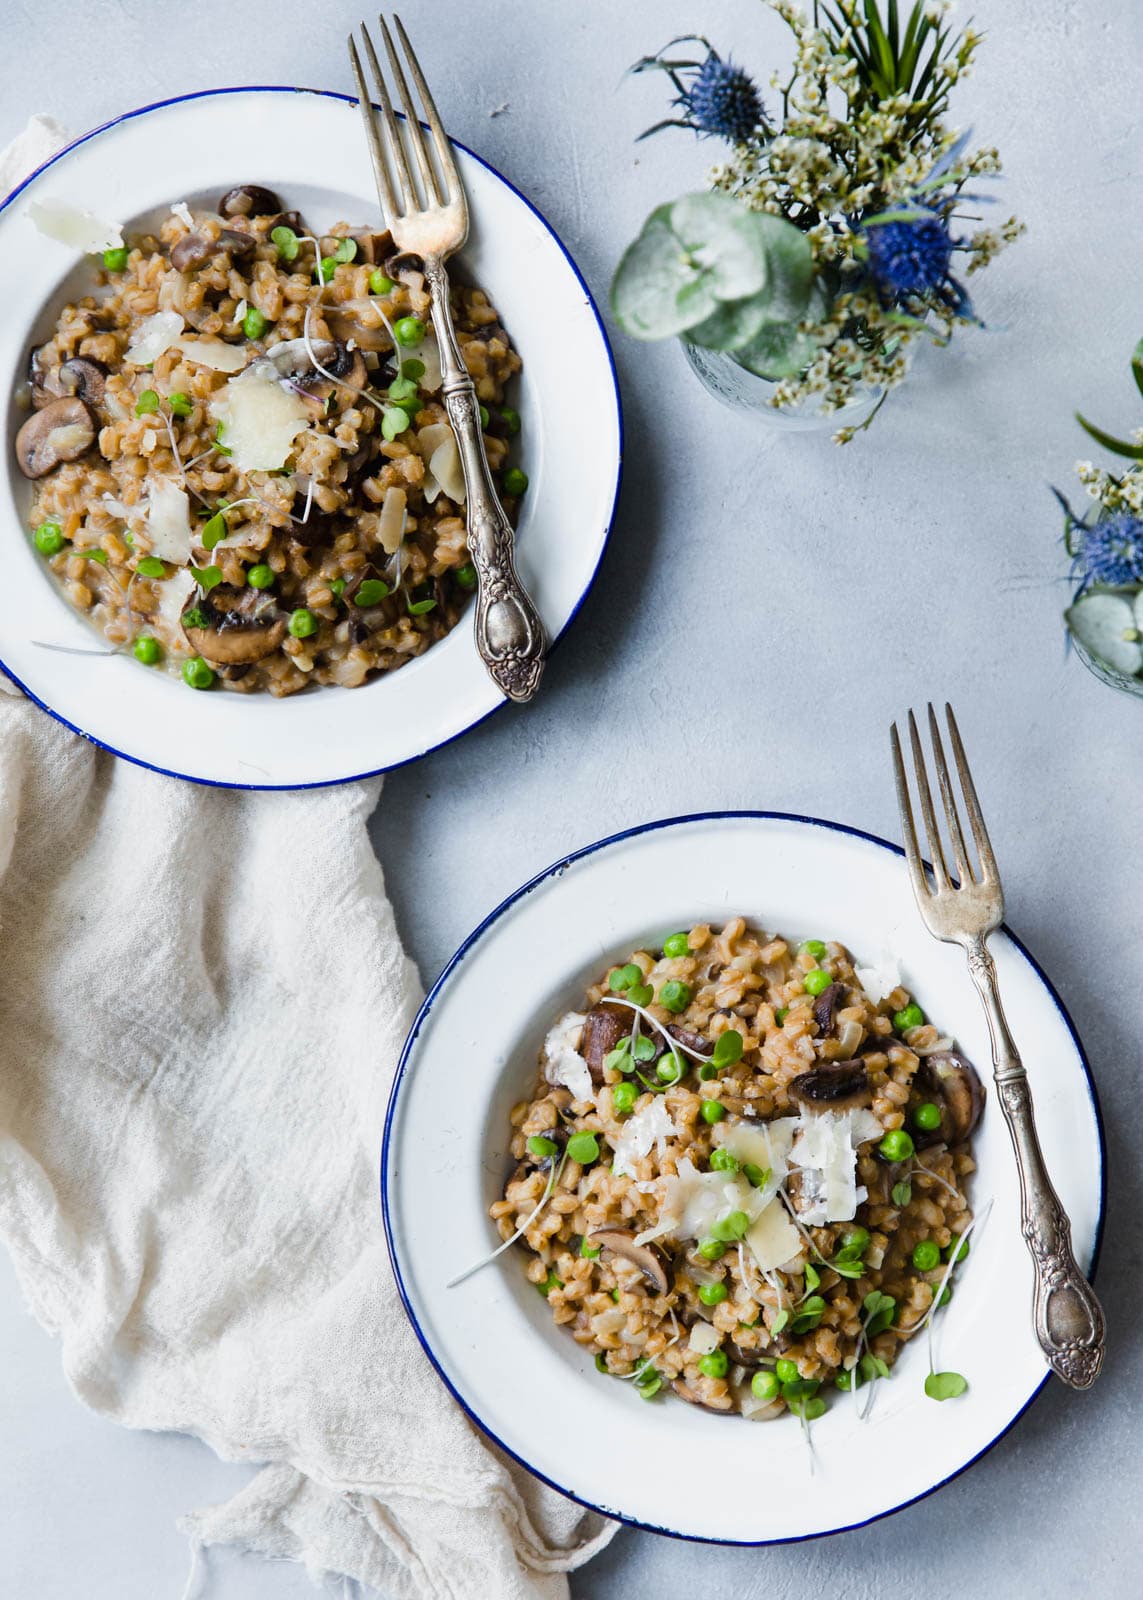 A warm and comforting farro risotto made with fresh spring peas and sautéed mushrooms!